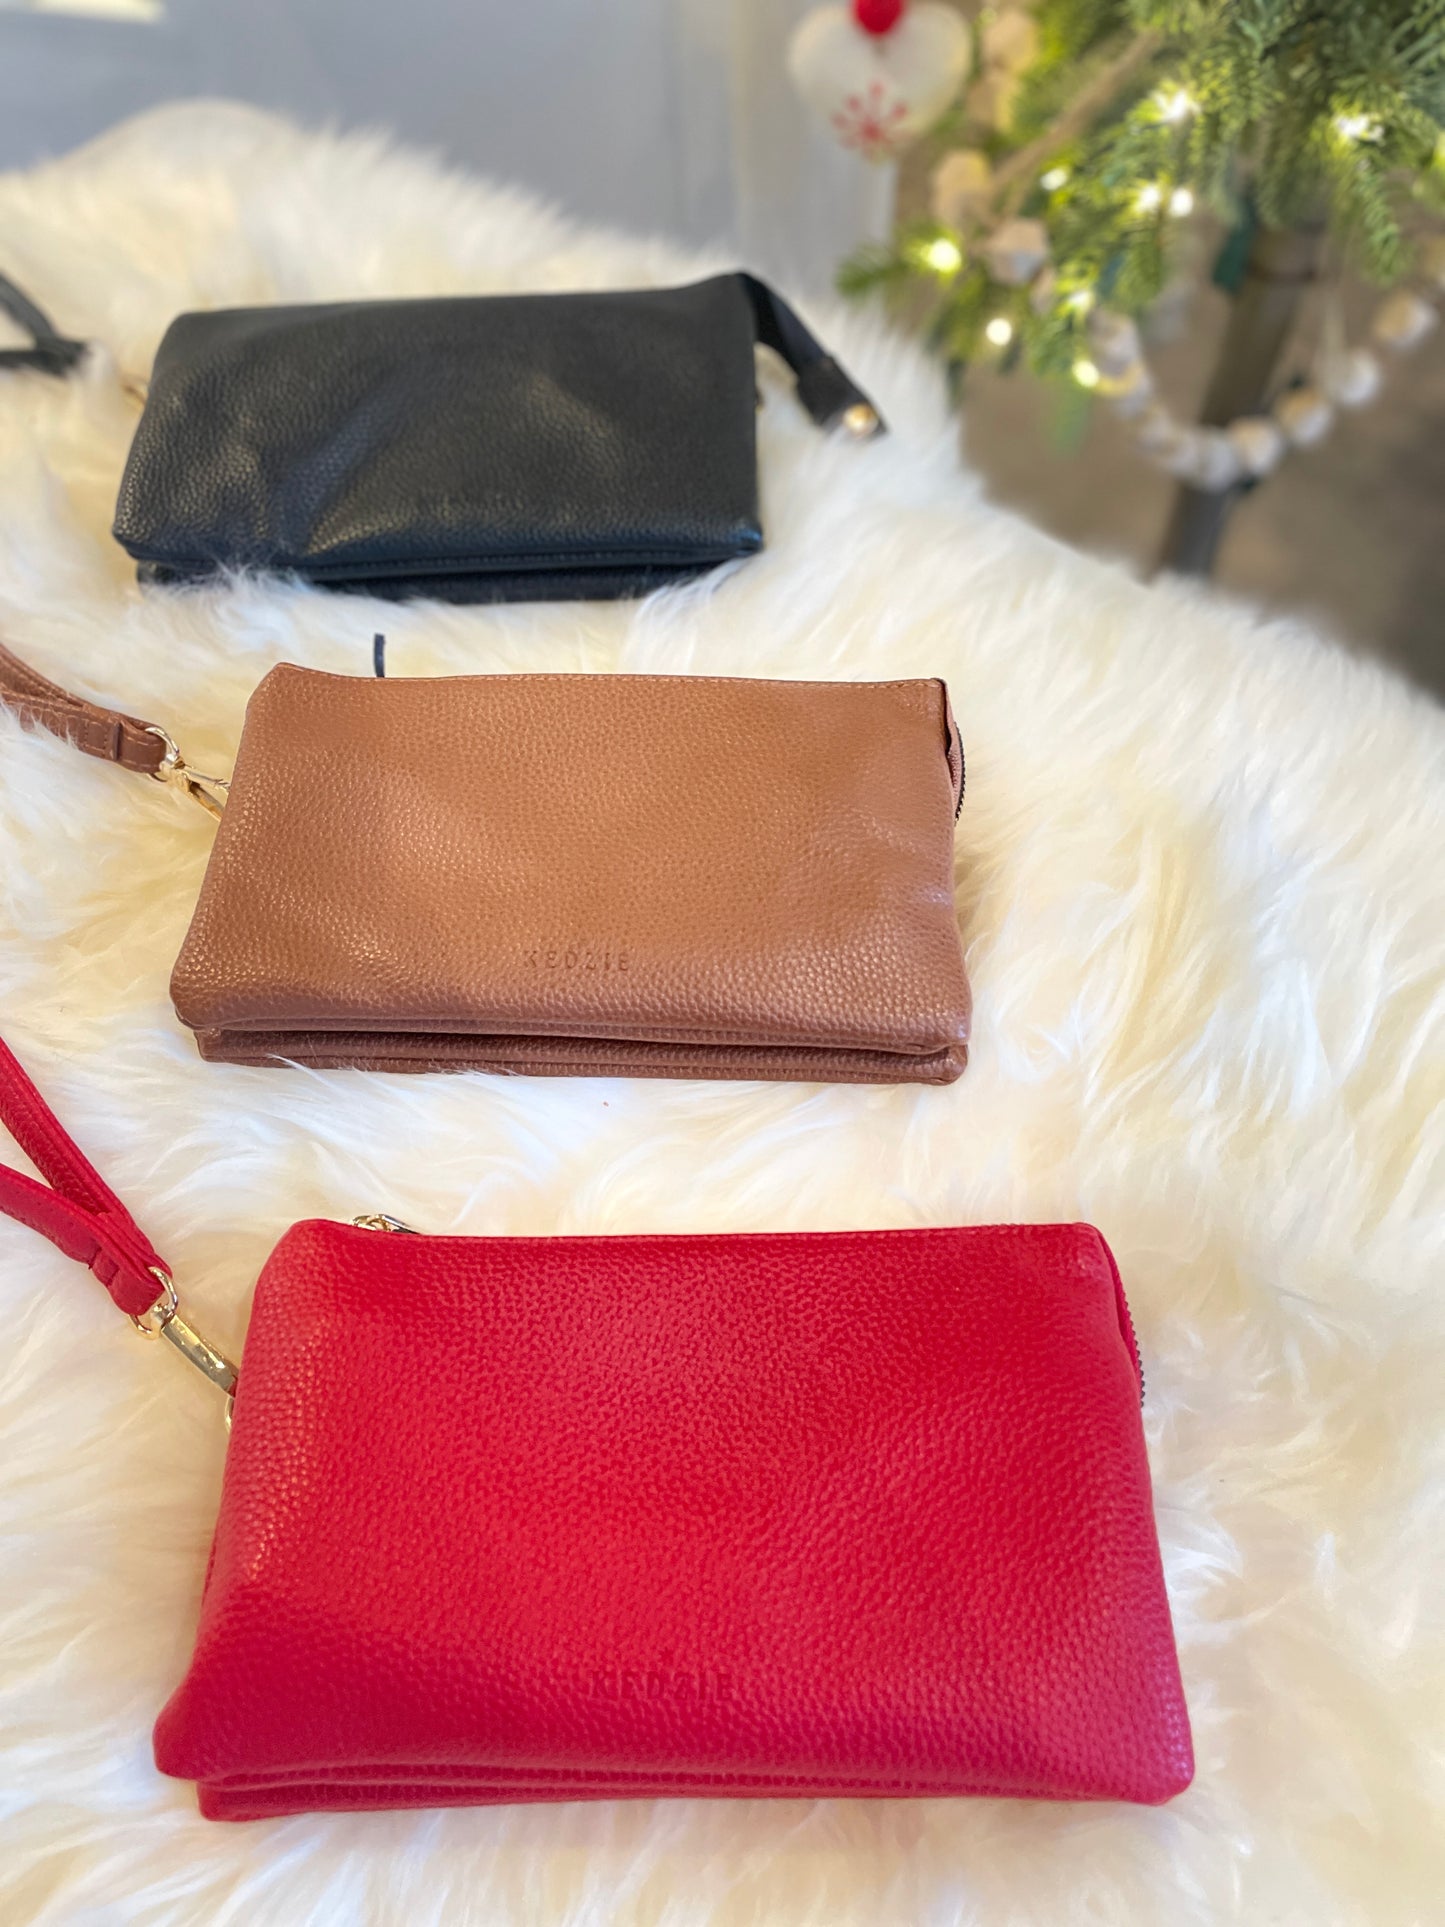 Kedzie - Purse with Removable Straps.